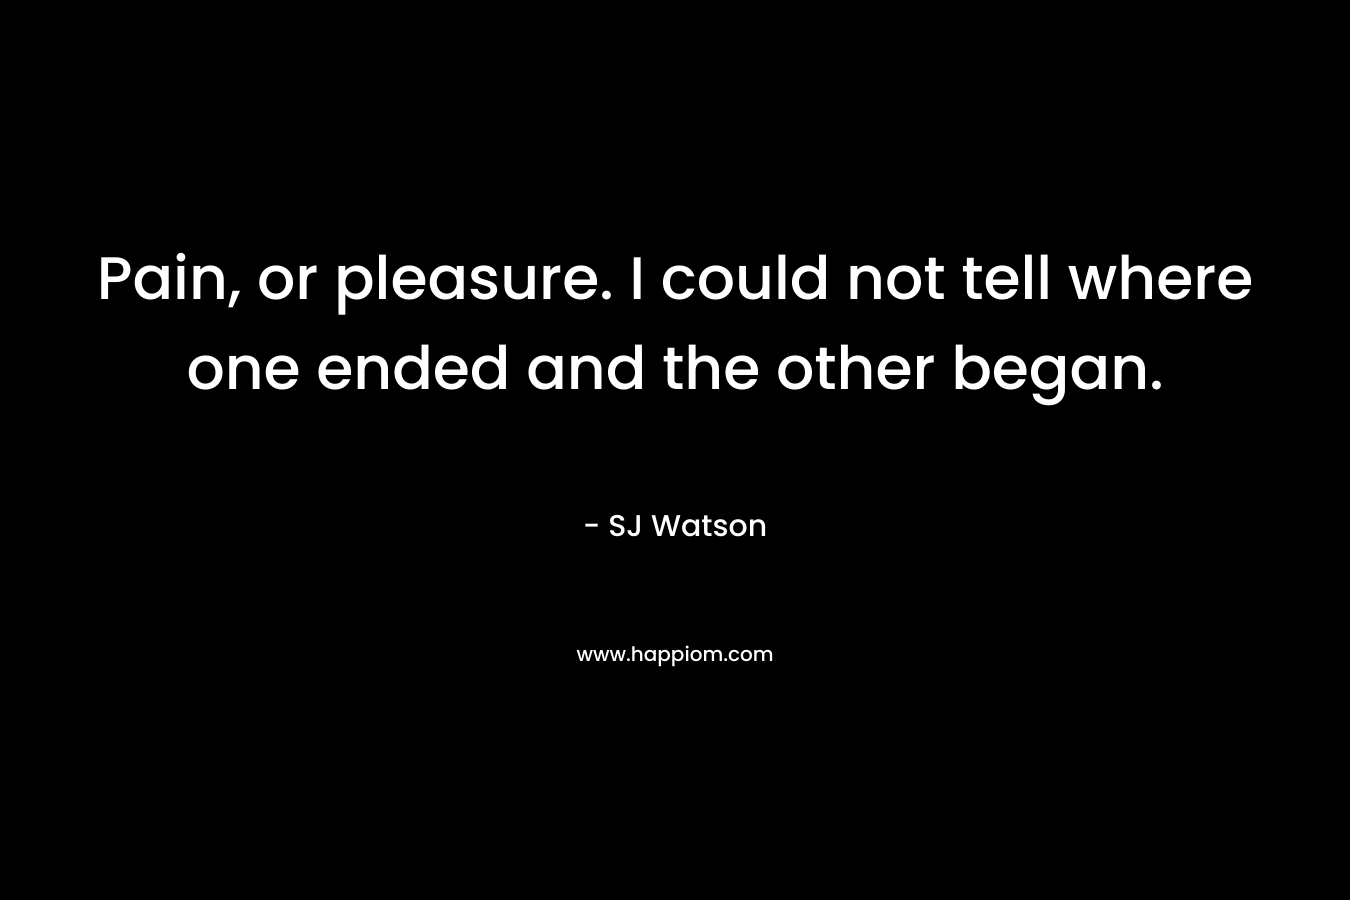 Pain, or pleasure. I could not tell where one ended and the other began. – SJ Watson